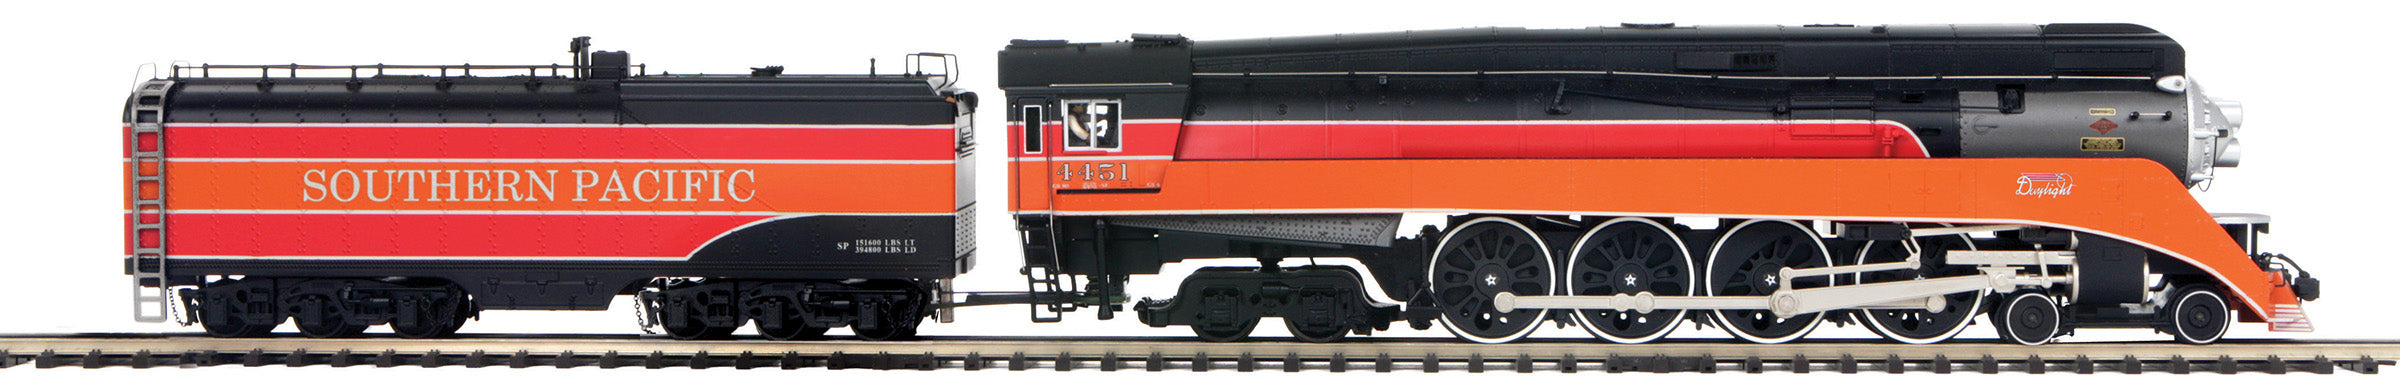 MTH 20-3917-1 - 4-8-4 GS-4 Steam Engine "Southern Pacific" #4451 w/ PS3 (Daylight Large Lettering)